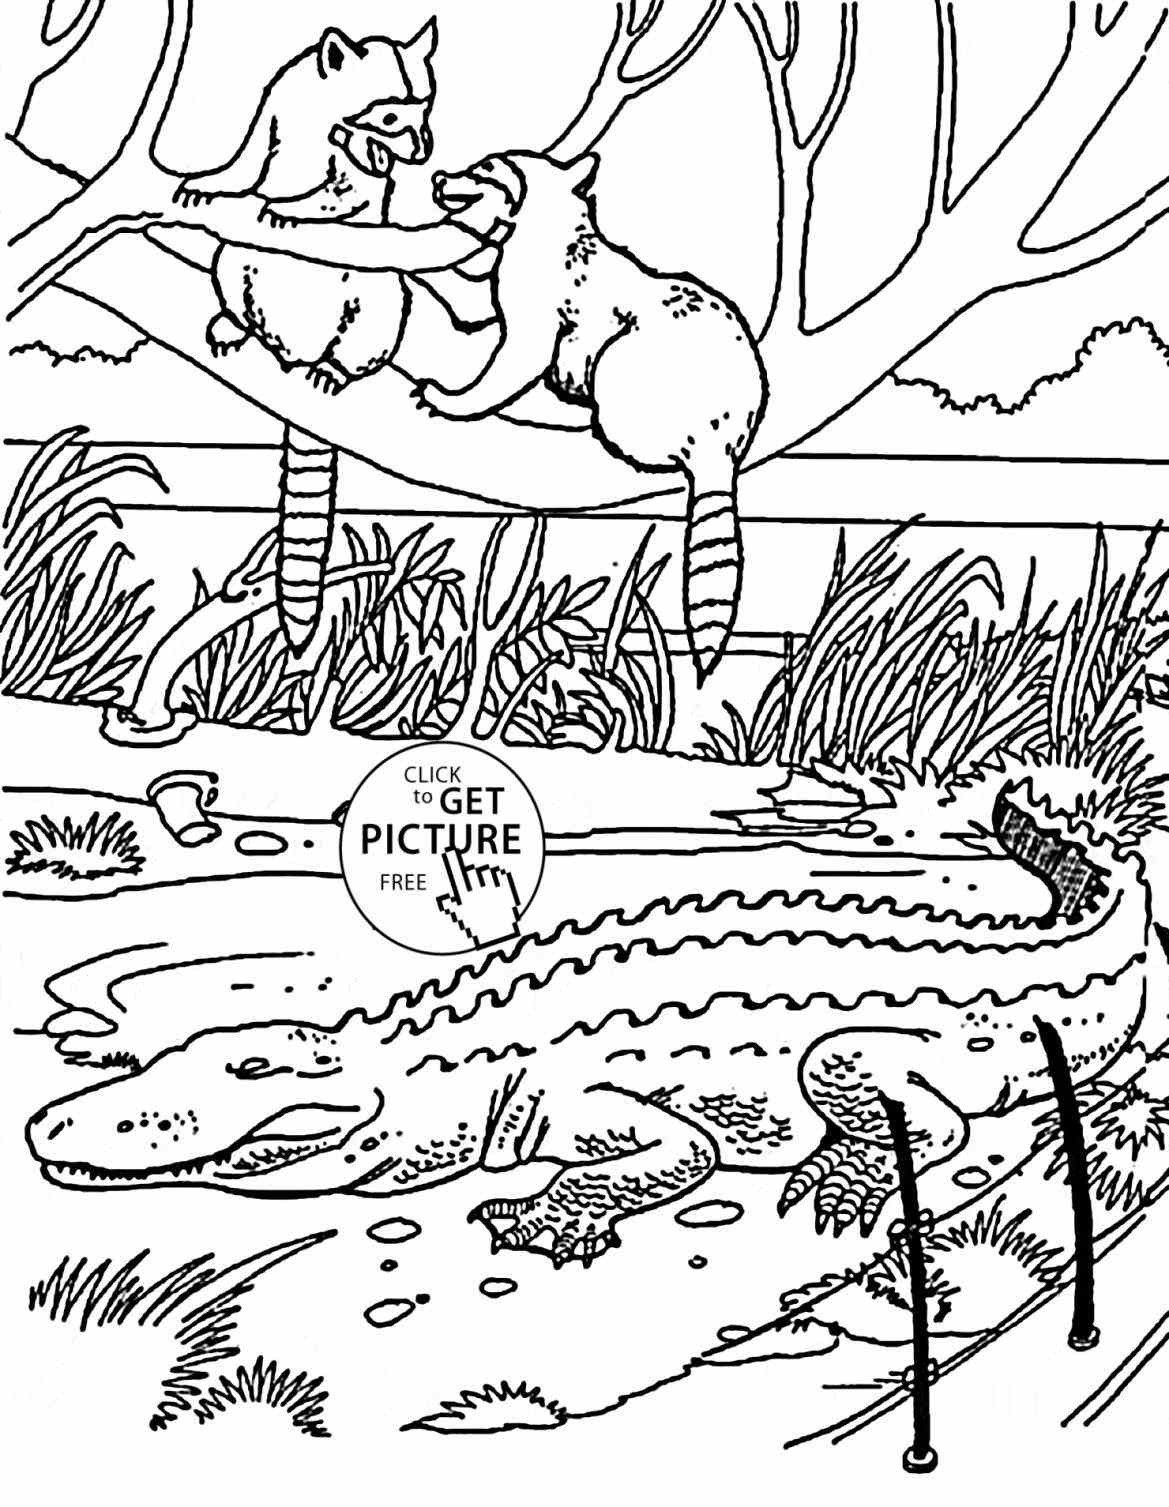 Zoo Coloring Sheets For Kids
 Z Is For Zoo Coloring Page Image Clipart grig3